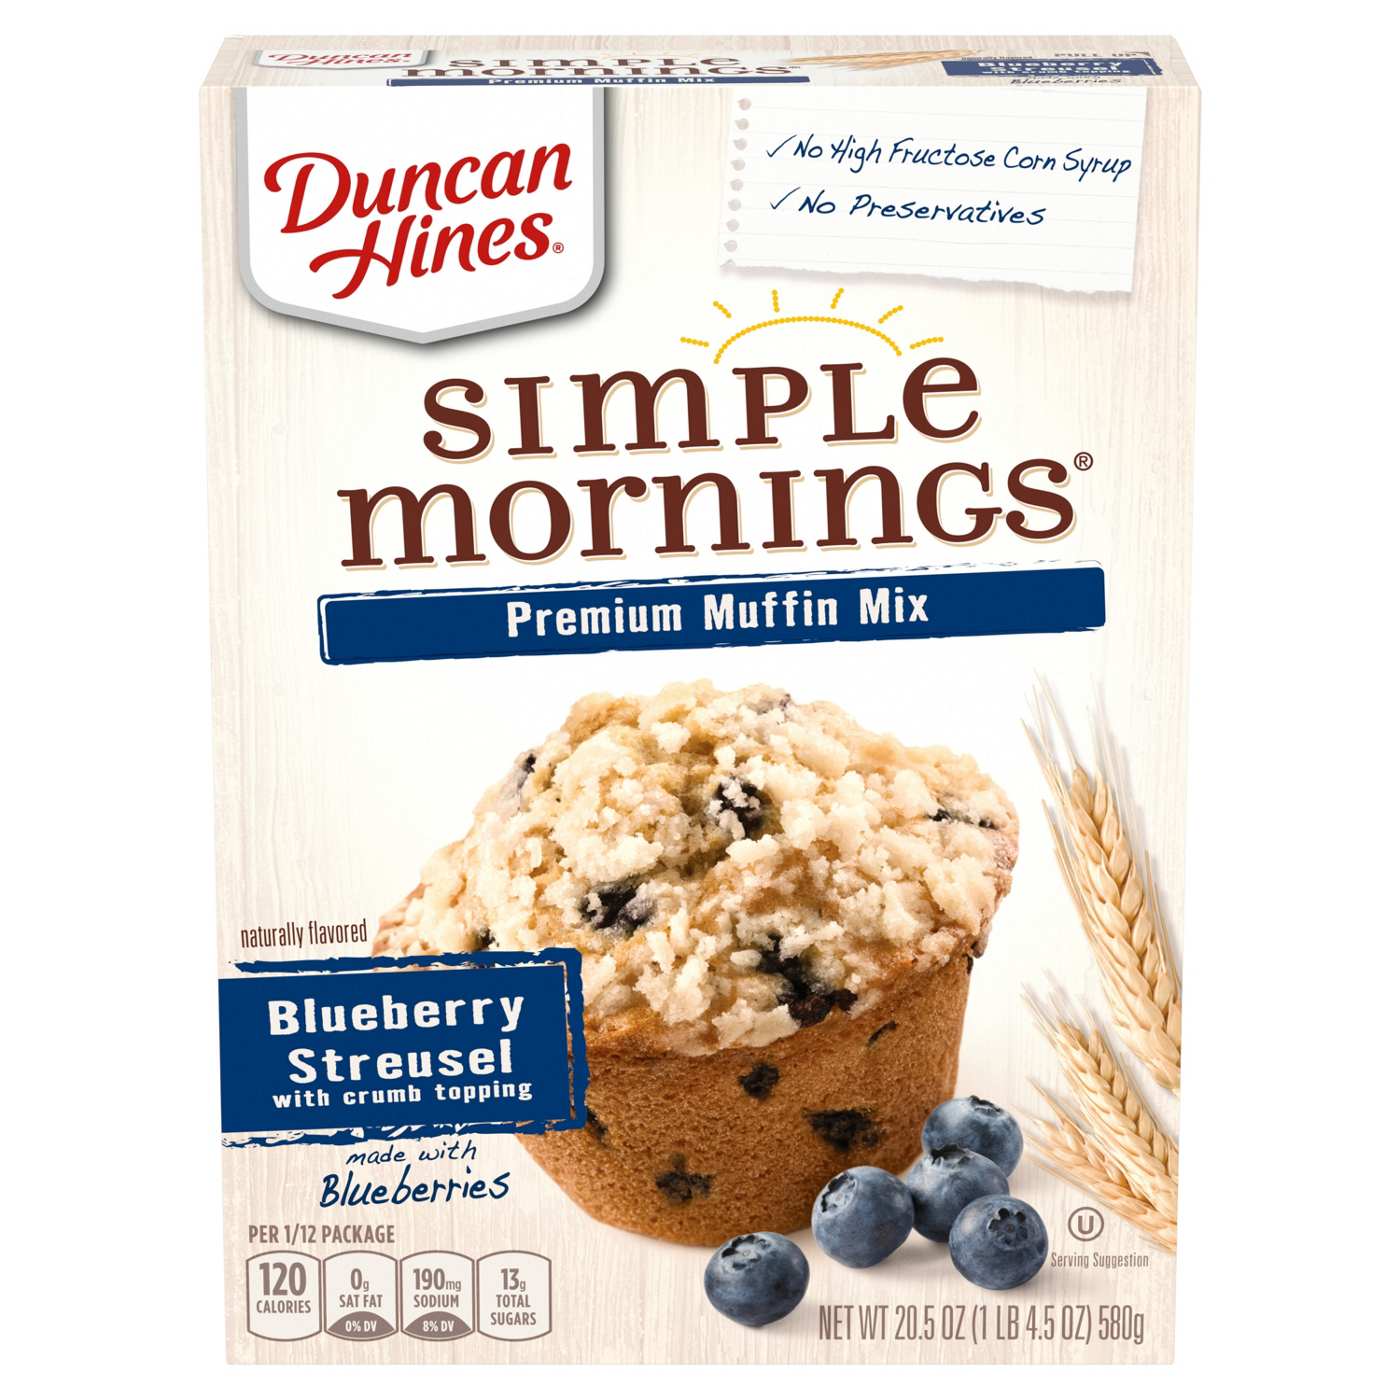 Duncan Hines Simple Mornings Blueberry Streusel Premium Muffin Mix; image 1 of 7